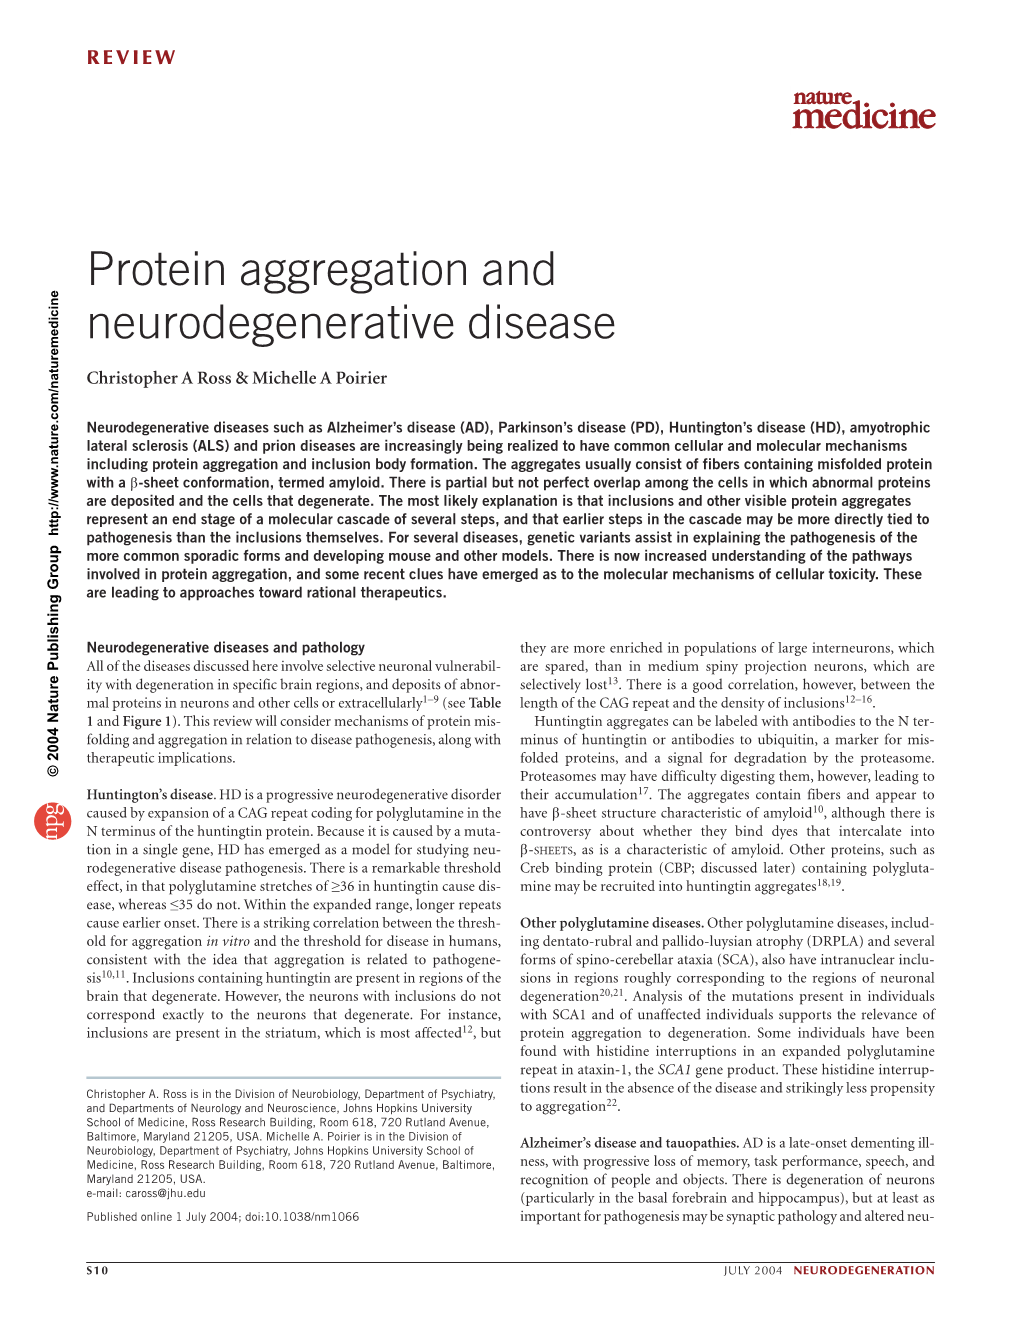 Protein Aggregation and Neurodegenerative Disease